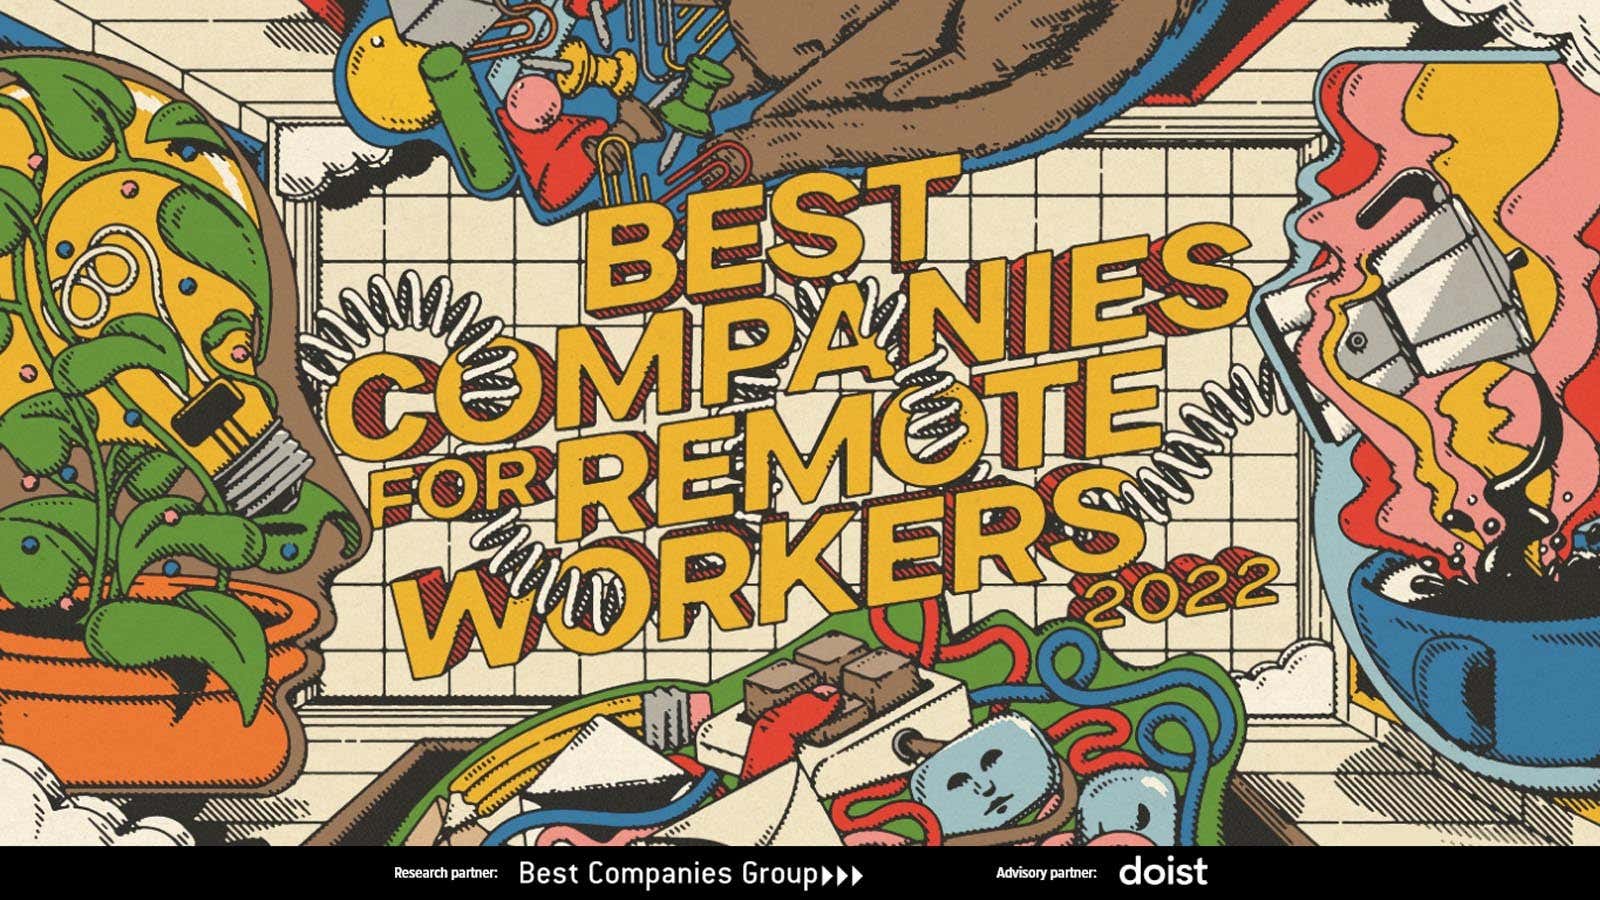 Quartz's Best Companies for Remote Workers 2022